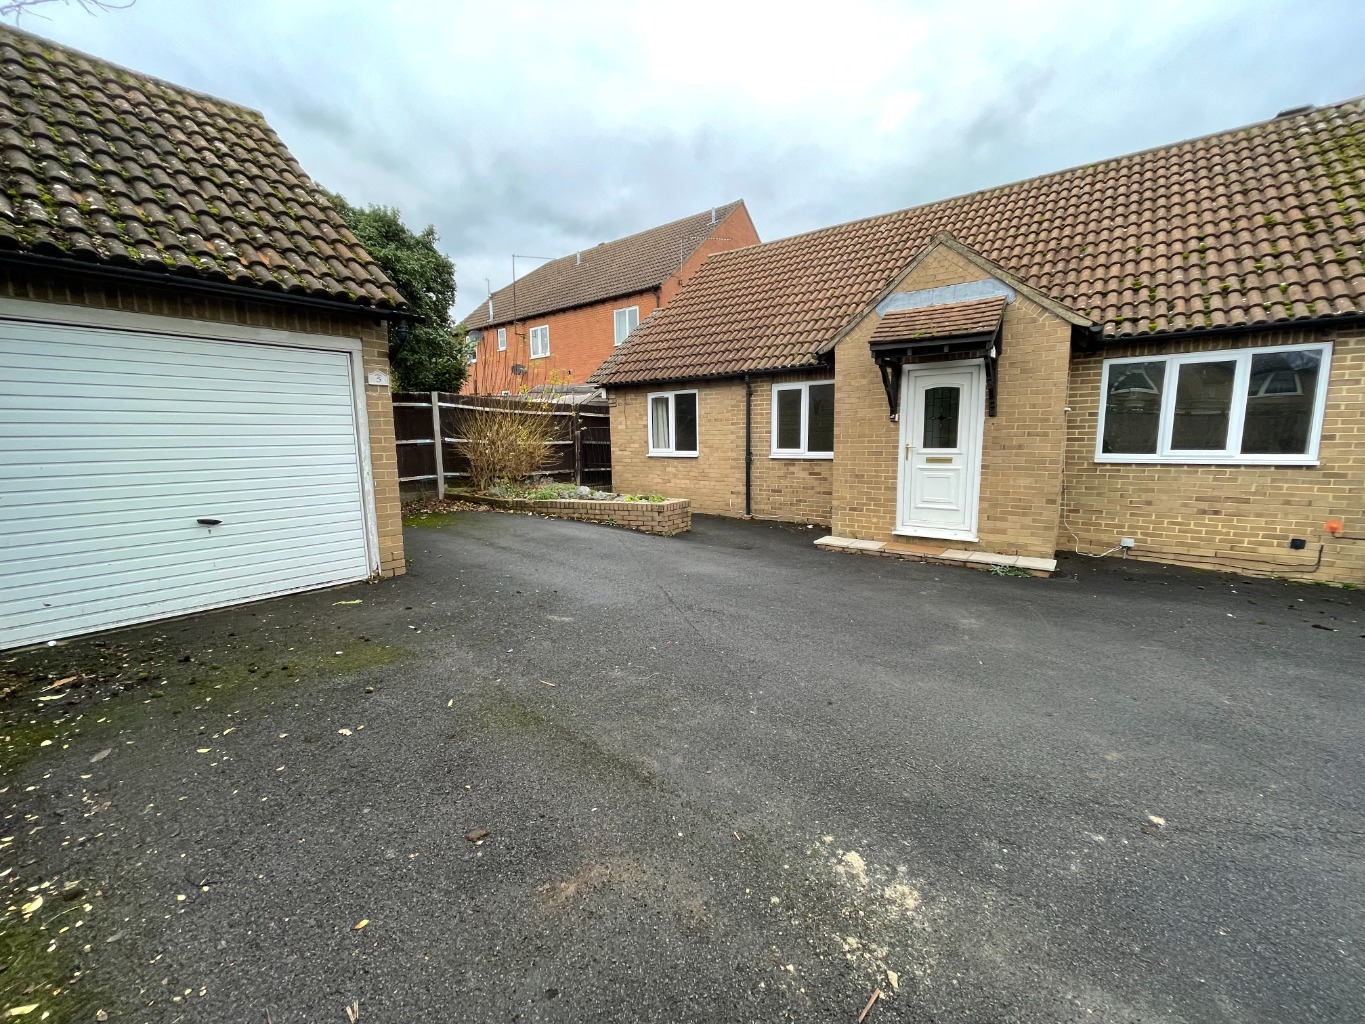 Fantastic opportunity to purchase a rarely available two bedroom bungalow in Lower Earley, scope to create a third bedroom and additional en-suite to bedroom two within existing footprint of the property